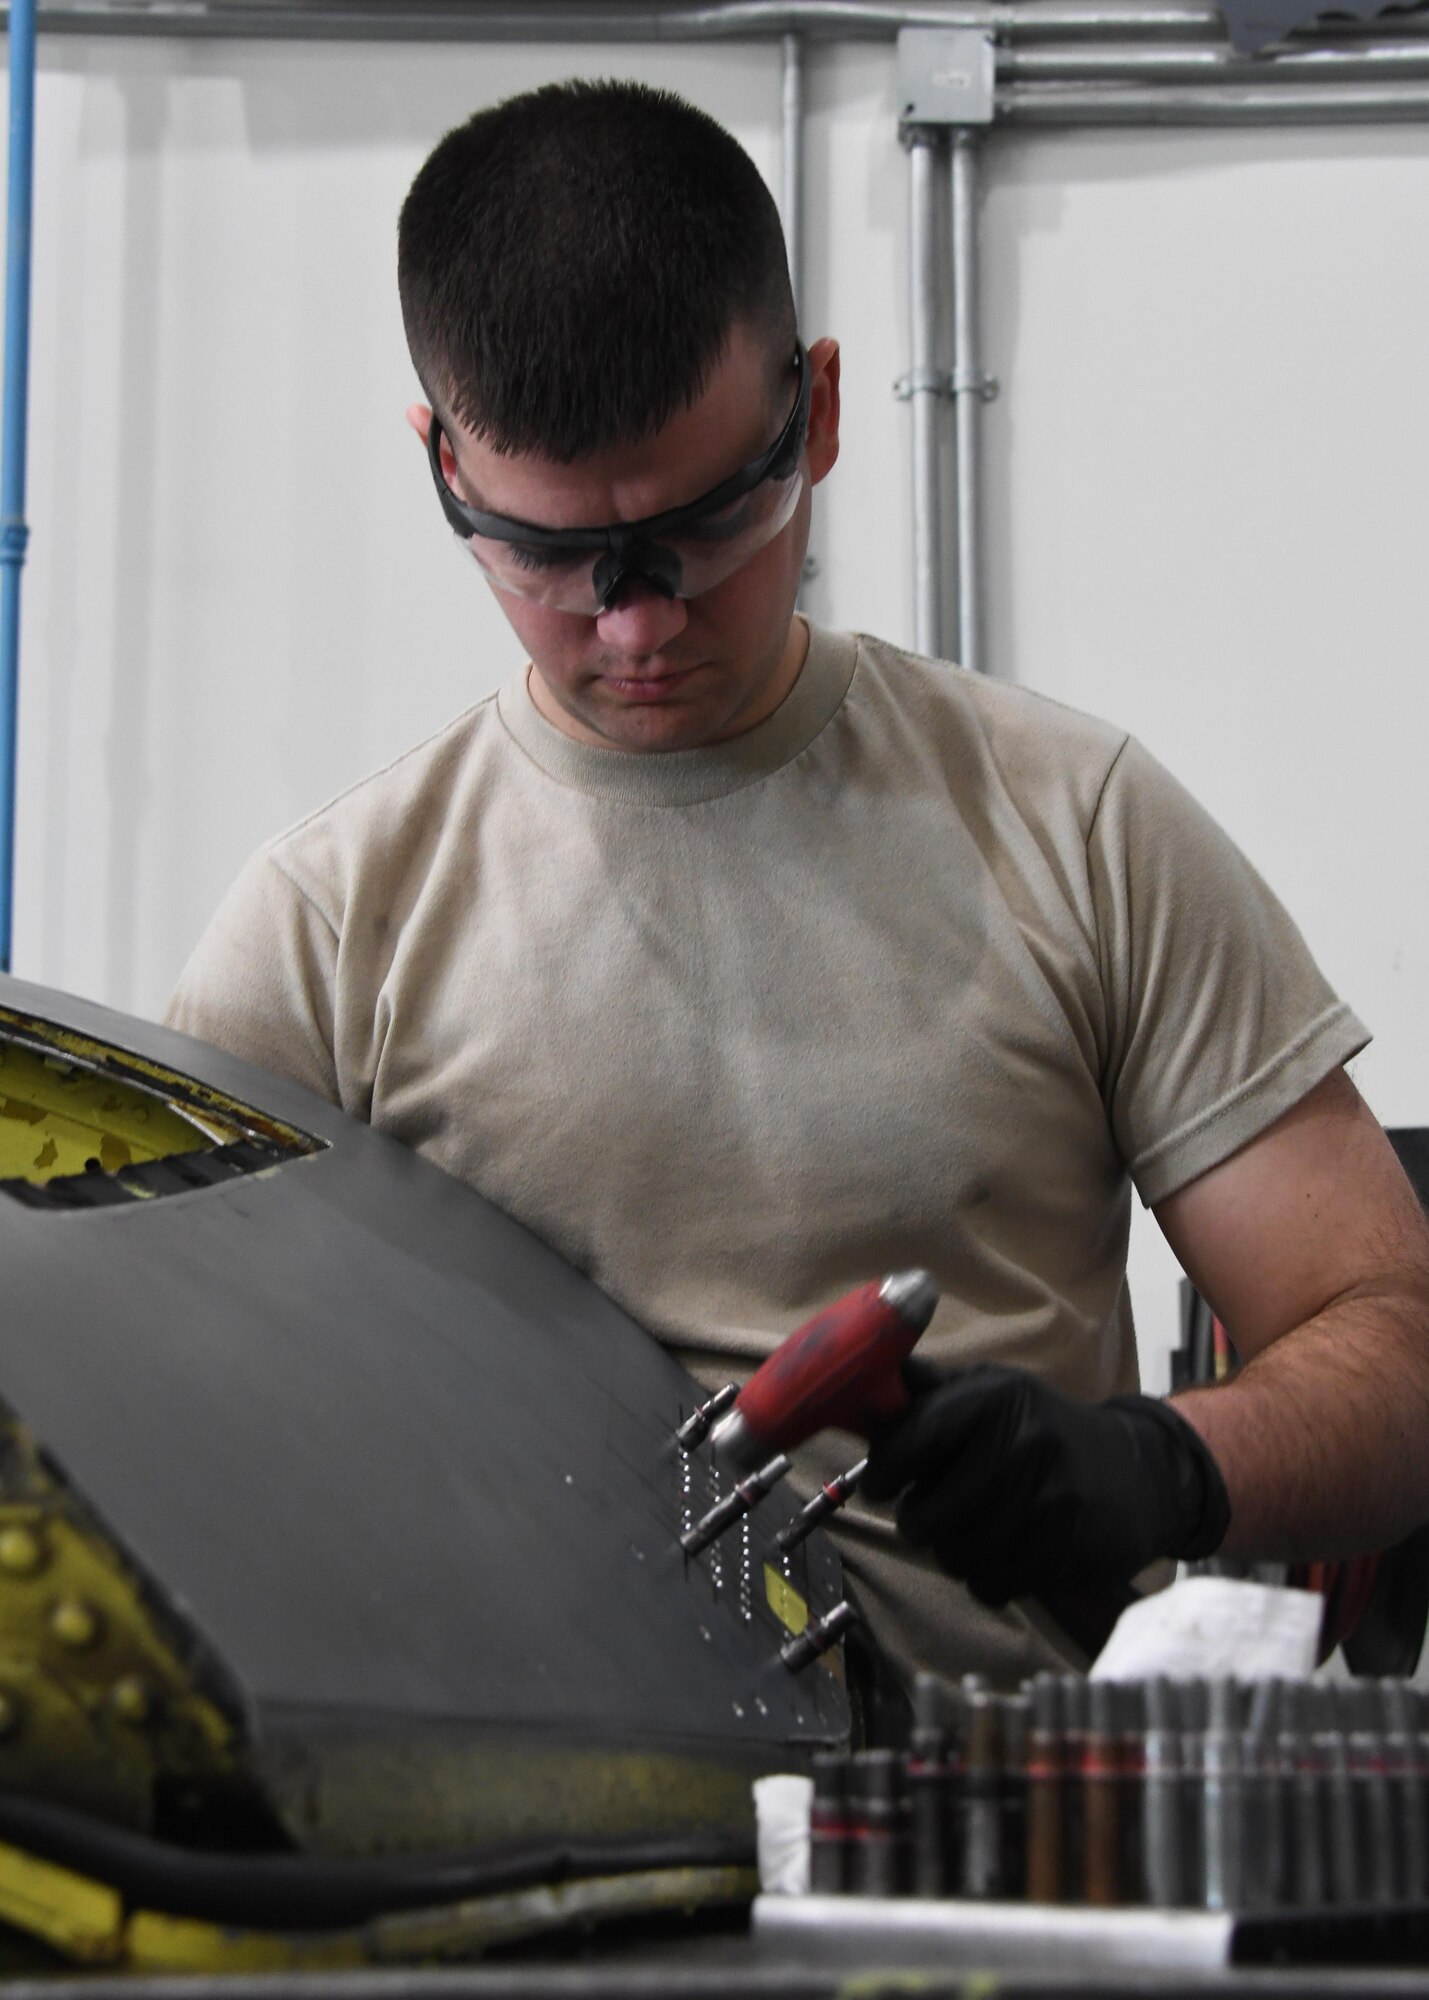 U.S. Air Force Airman 1st Class Stephen Hunter, an aircraft structural maintenance journeyman with the 379th Expeditionary Maintenance Squadron Sheet Metal Shop, prepares to shoot rivets into a boom operator sight at Al Udeid Air Base, Qatar, Feb. 16, 2017. Hunter was installing a patch onto the piece, which fits onto a KC-135 Stratotanker. (U.S. Air Force photo by Senior Airman Miles Wilson)